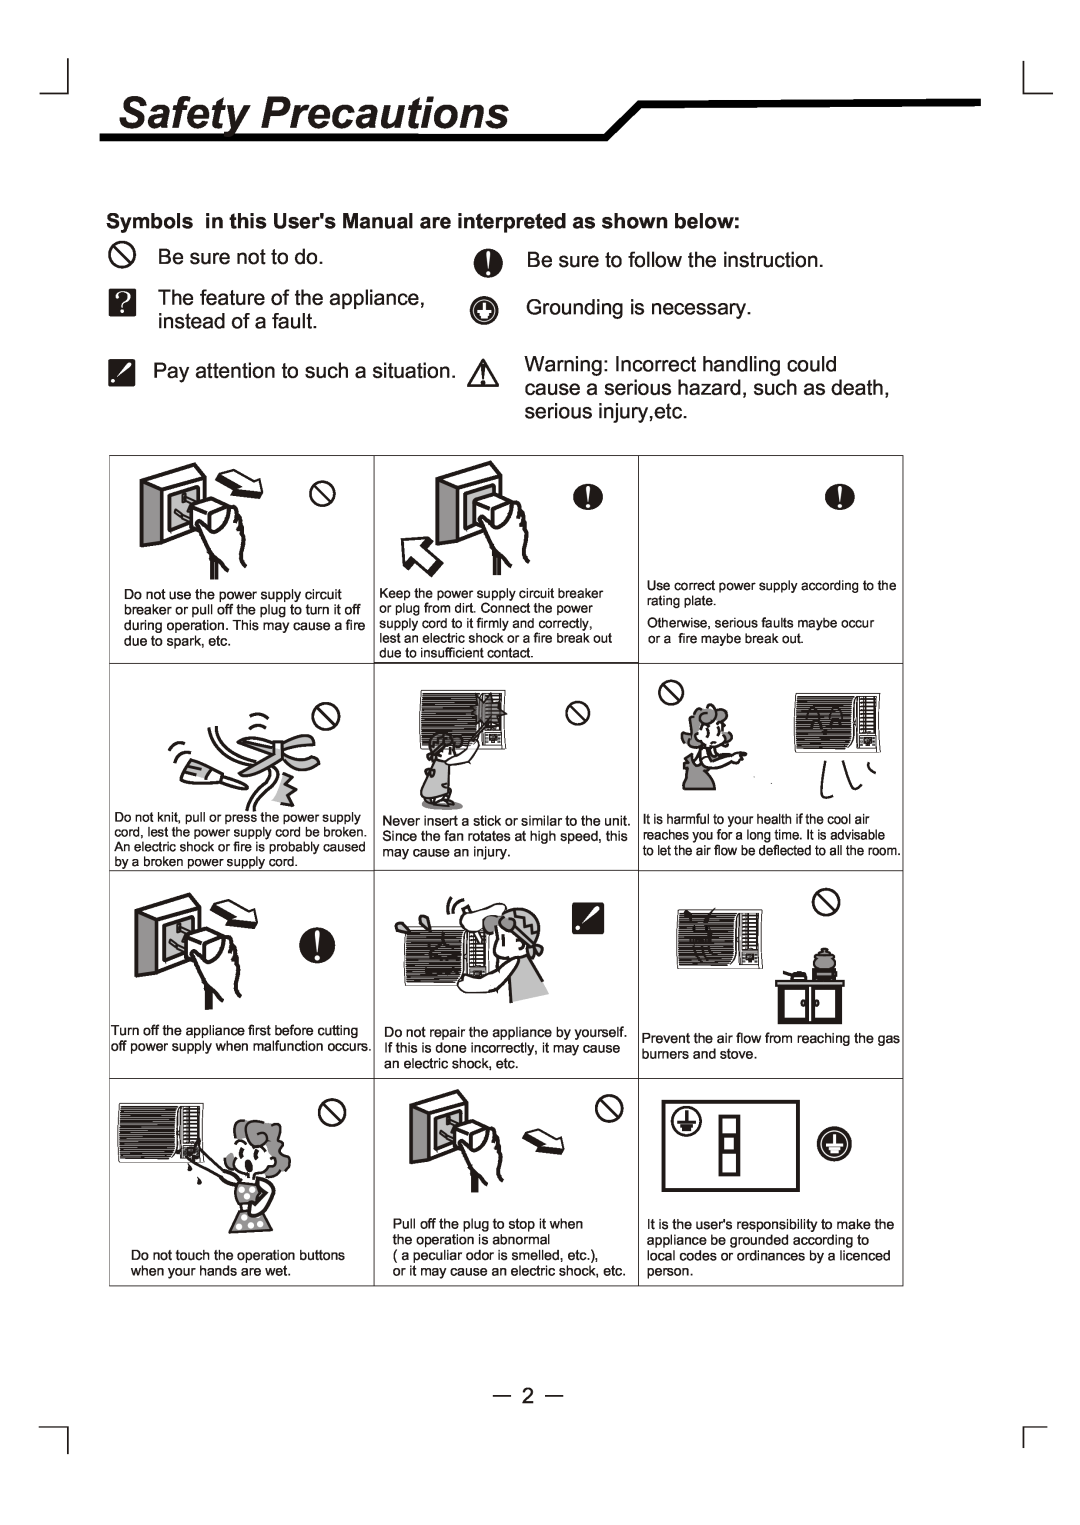 NEC RWC-4717, RWC-3217 user manual Safety Precautions, Be sure not to do, The feature of the appliance, instead of a fault 